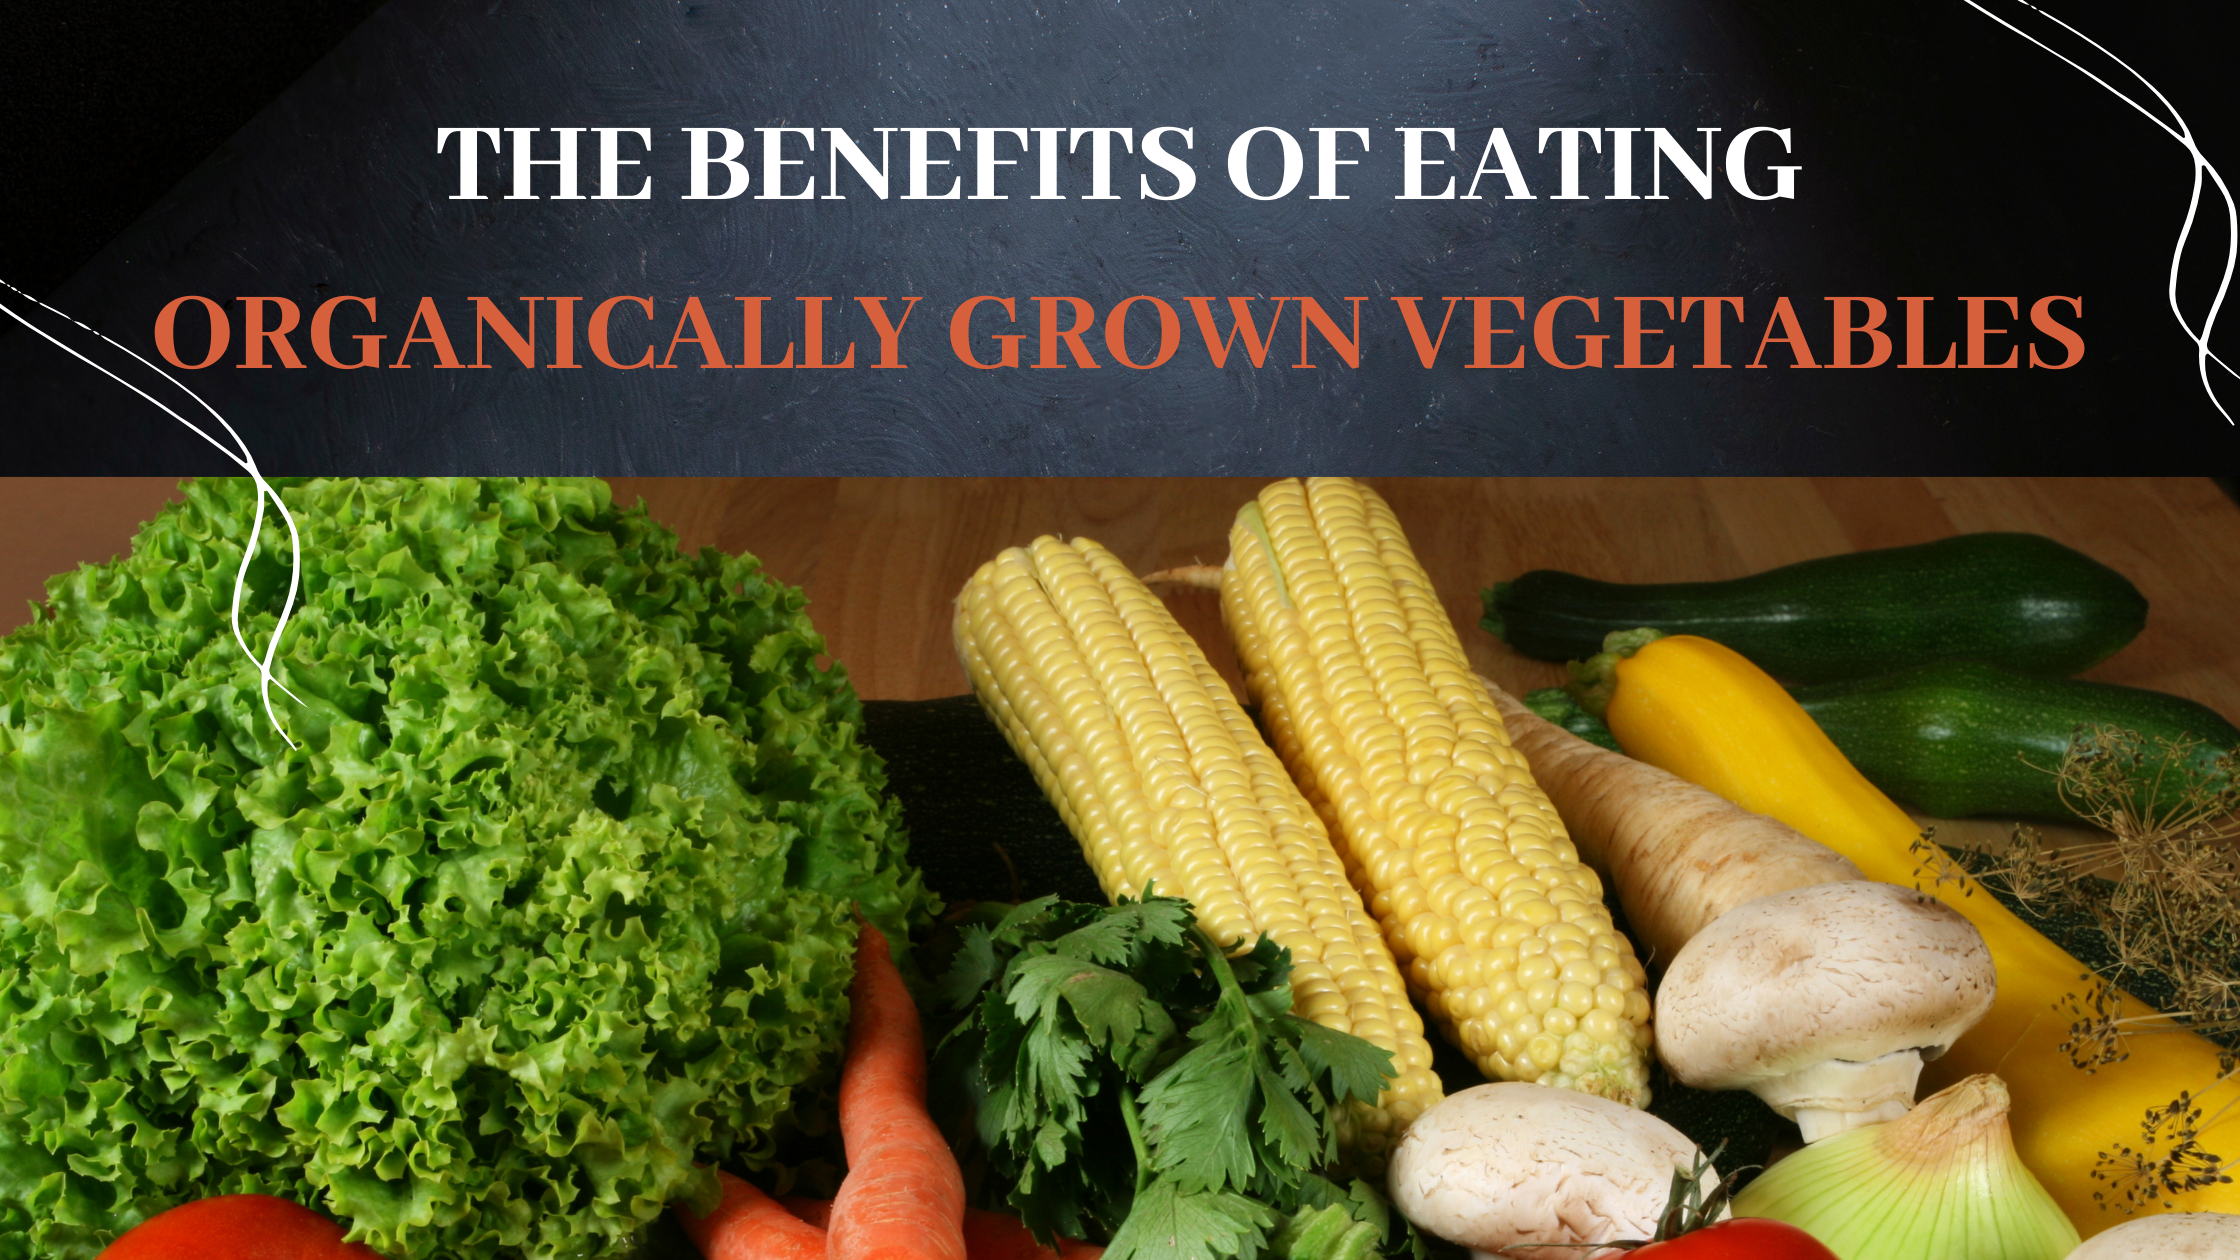 The Benefits of Eating Organically Grown Vegetables